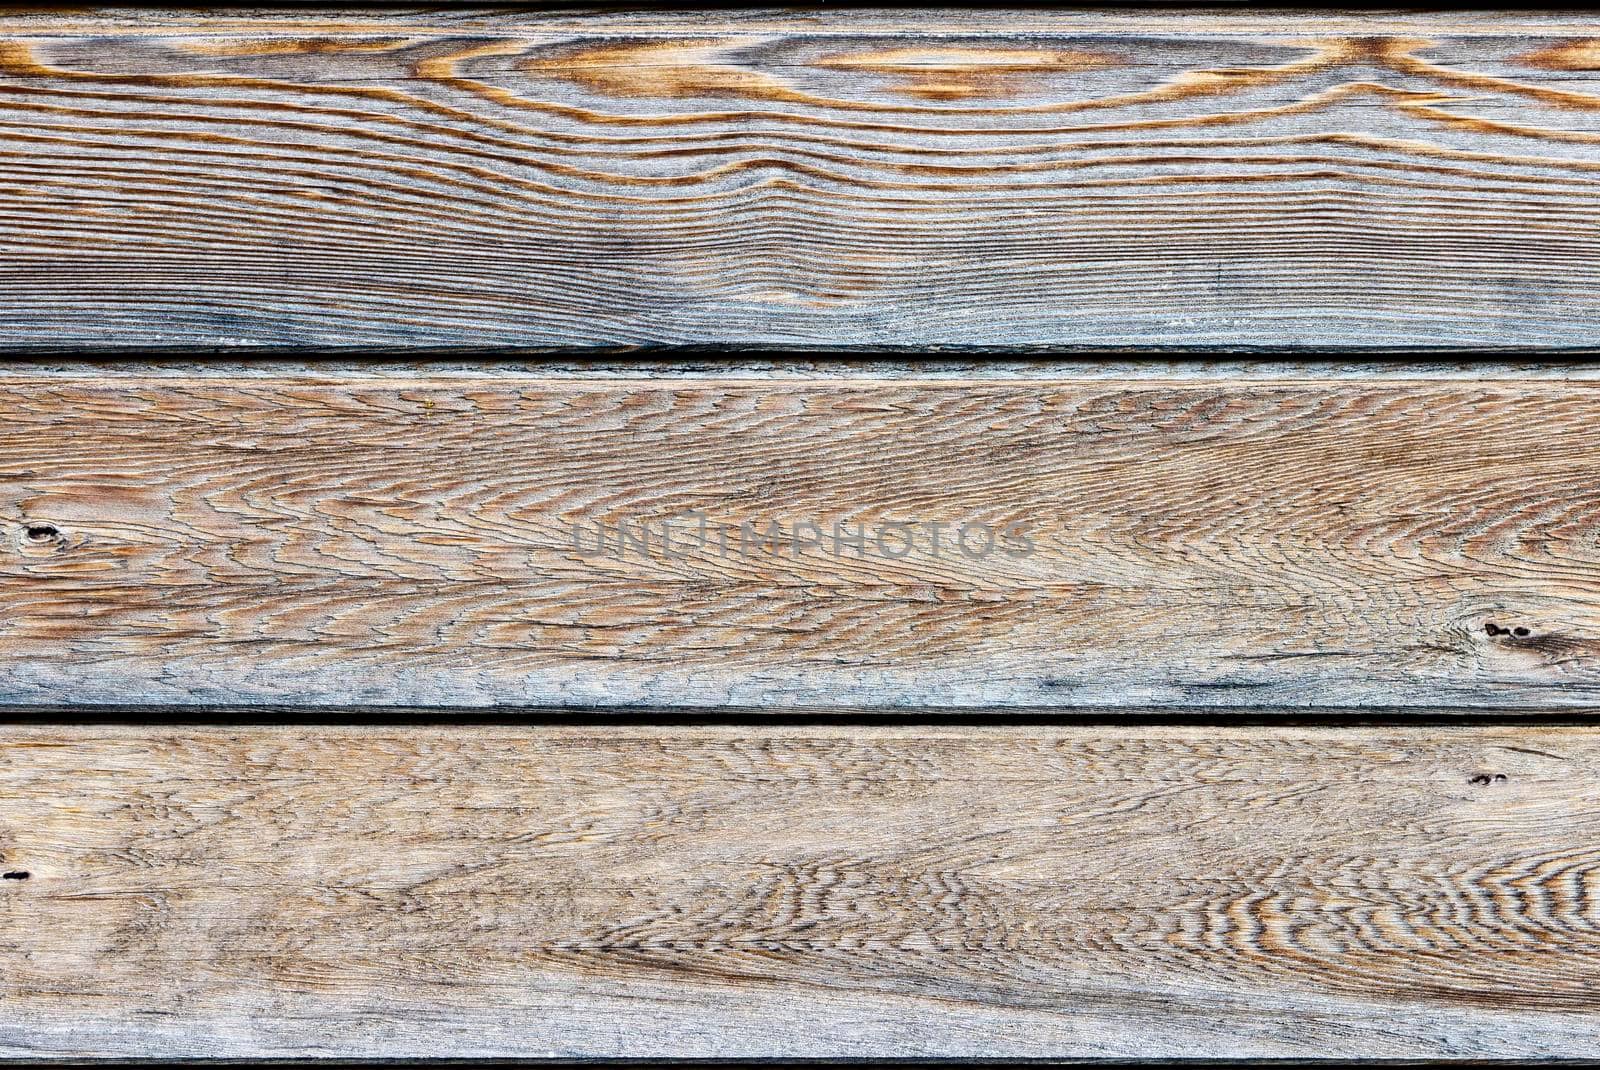 Three horizontal natural wooden panels. The panels are light brown in colour and have a silver tint.